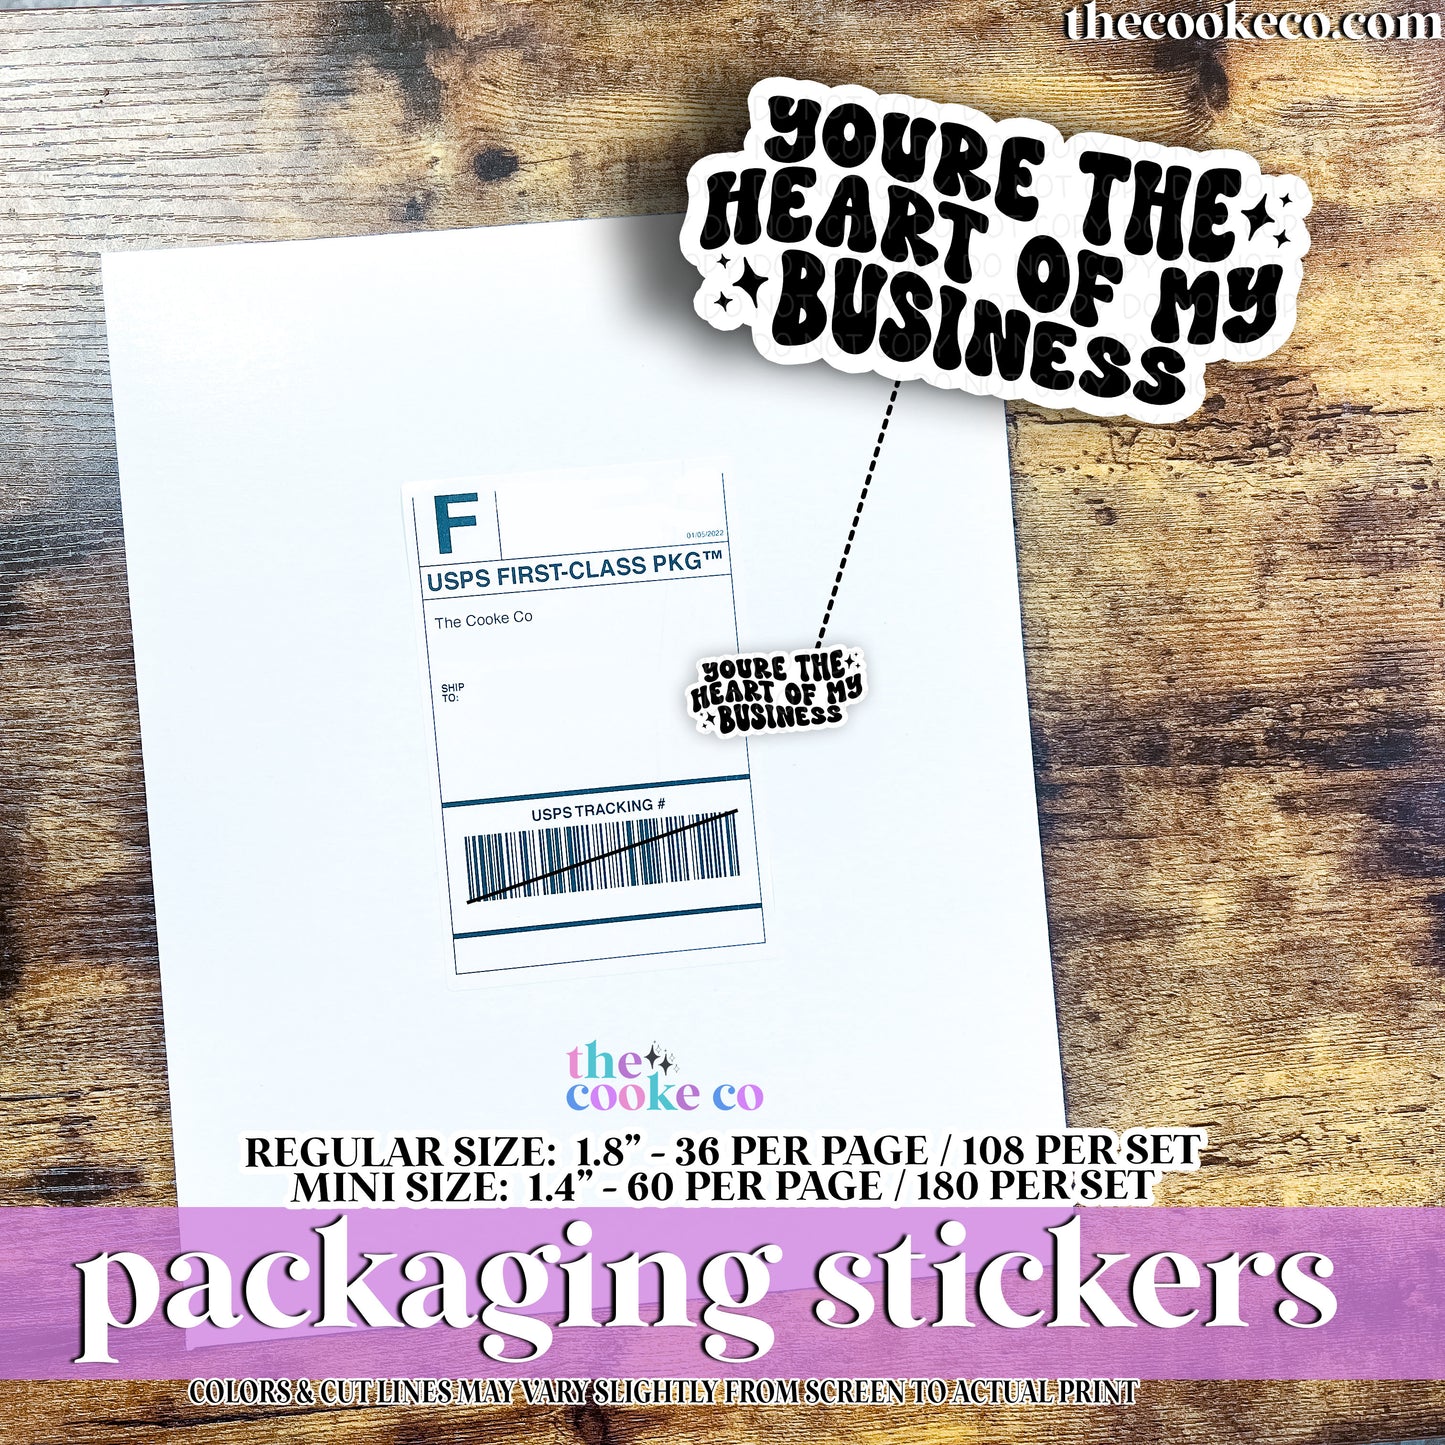 PTO Packaging Stickers | #BW0249 - HEART OF MY BUSINESS